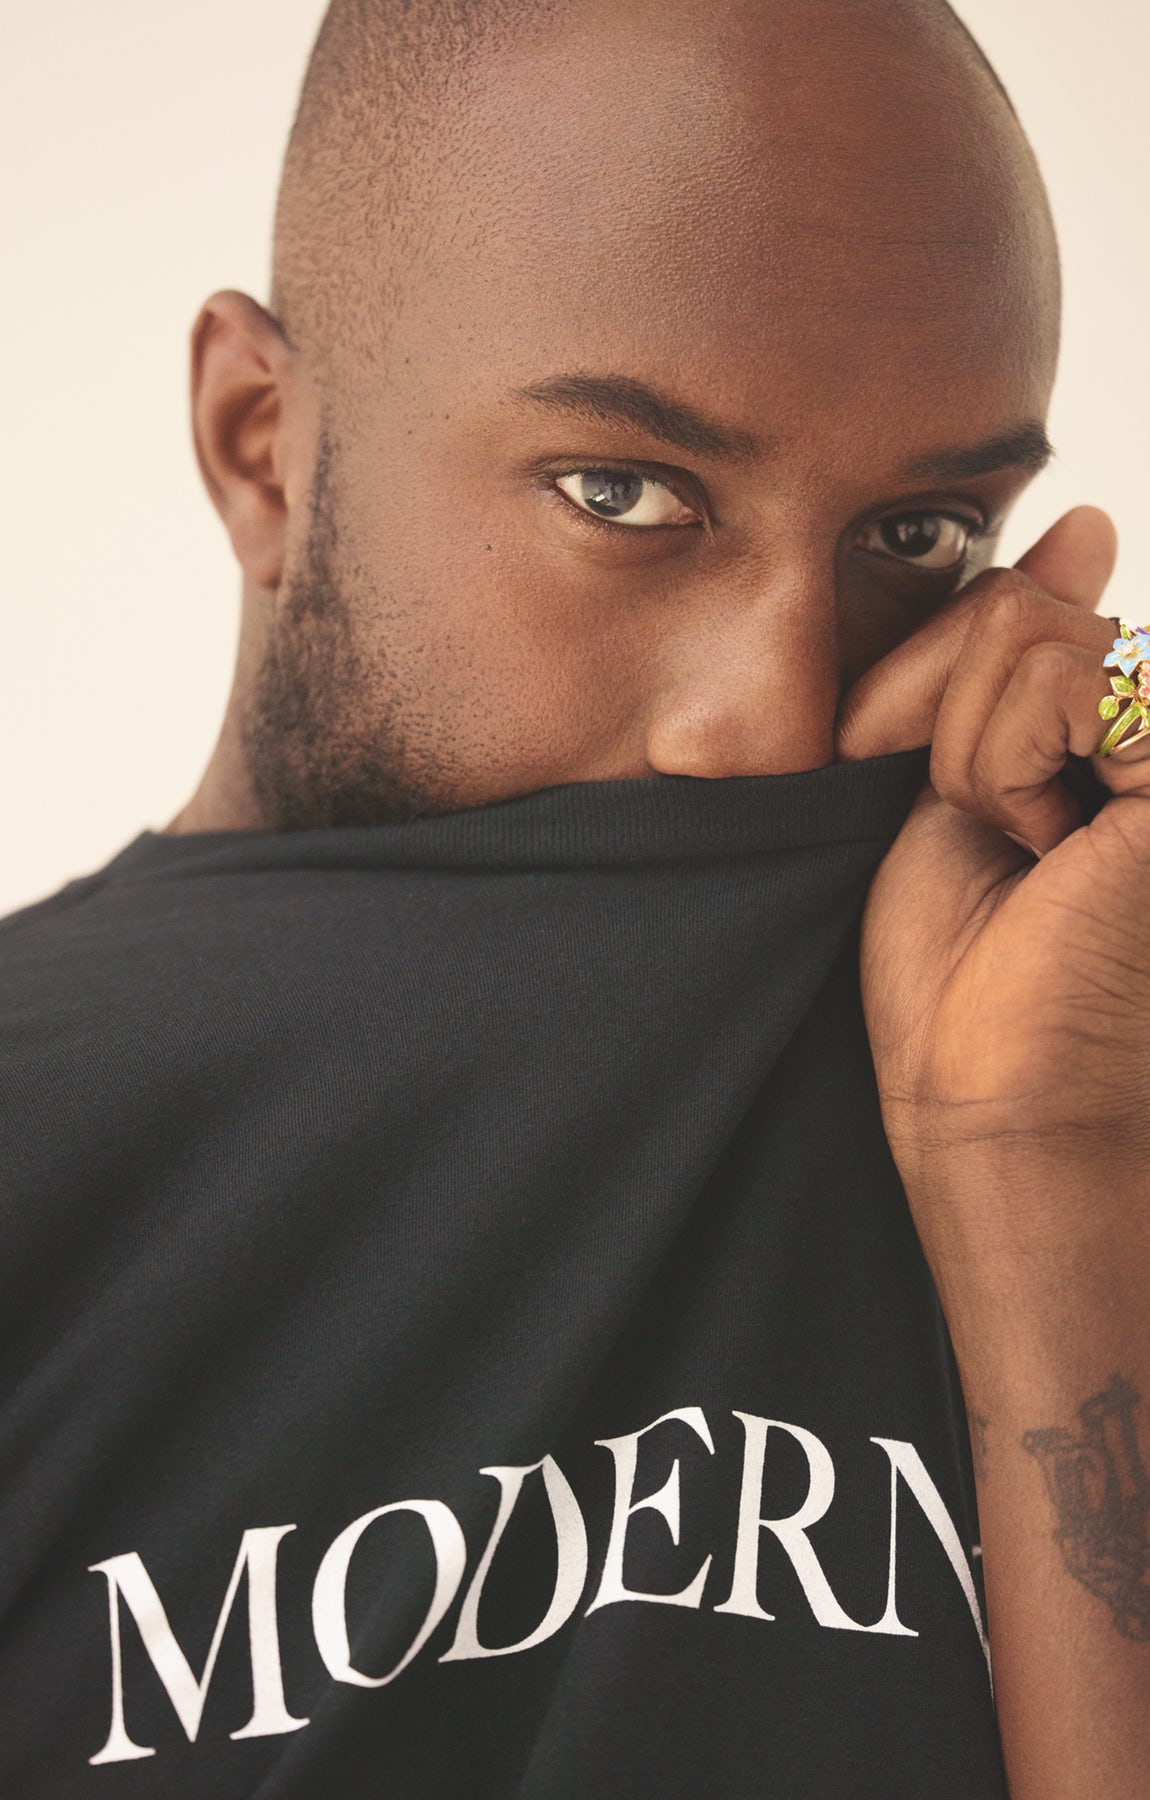 Virgil Abloh and Louis Vuitton: who is scamming whom?